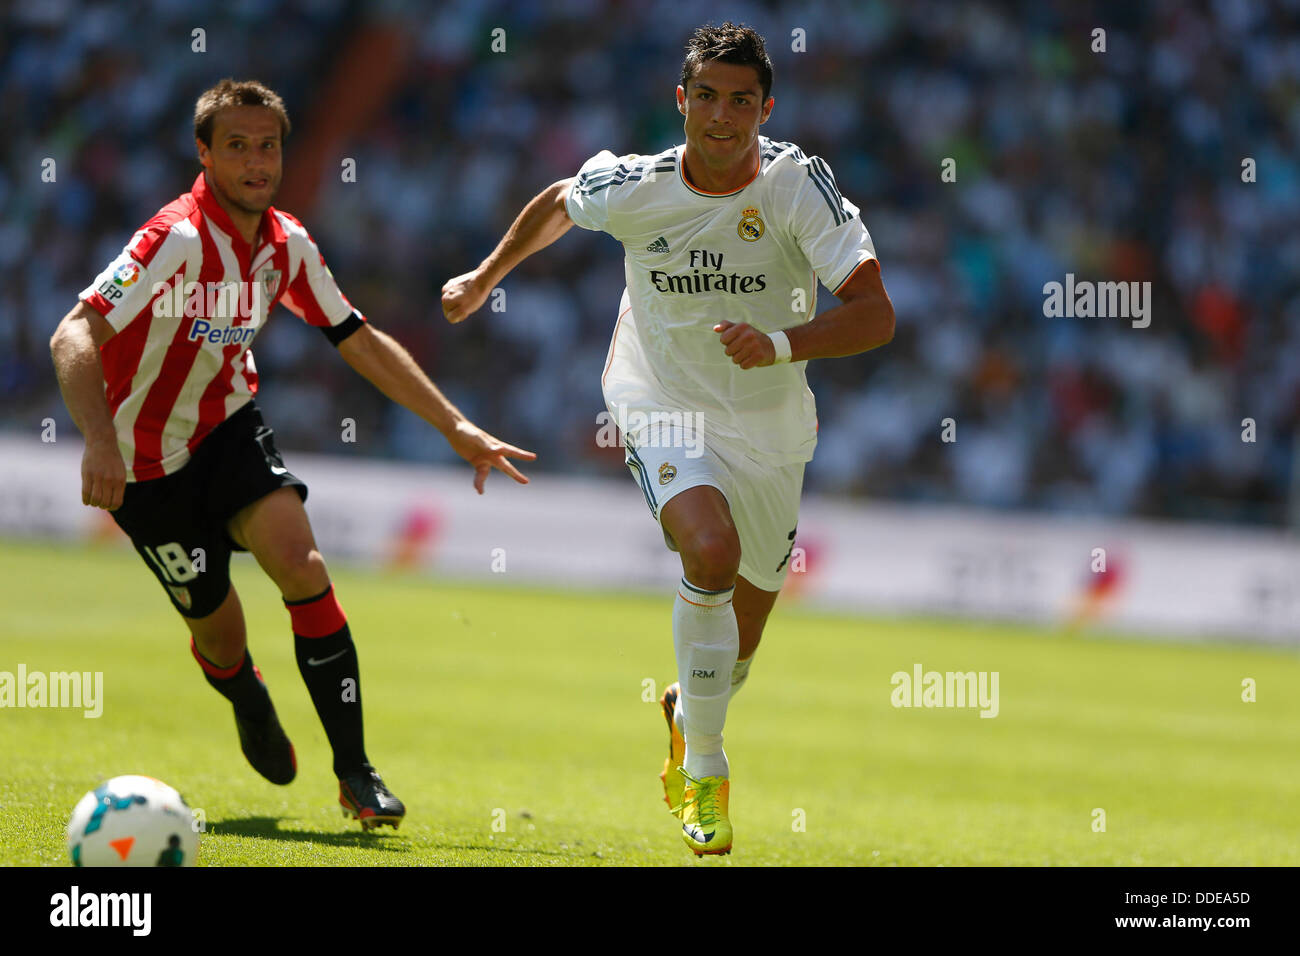 Athletic club de bilbao hi-res stock photography and images - Alamy